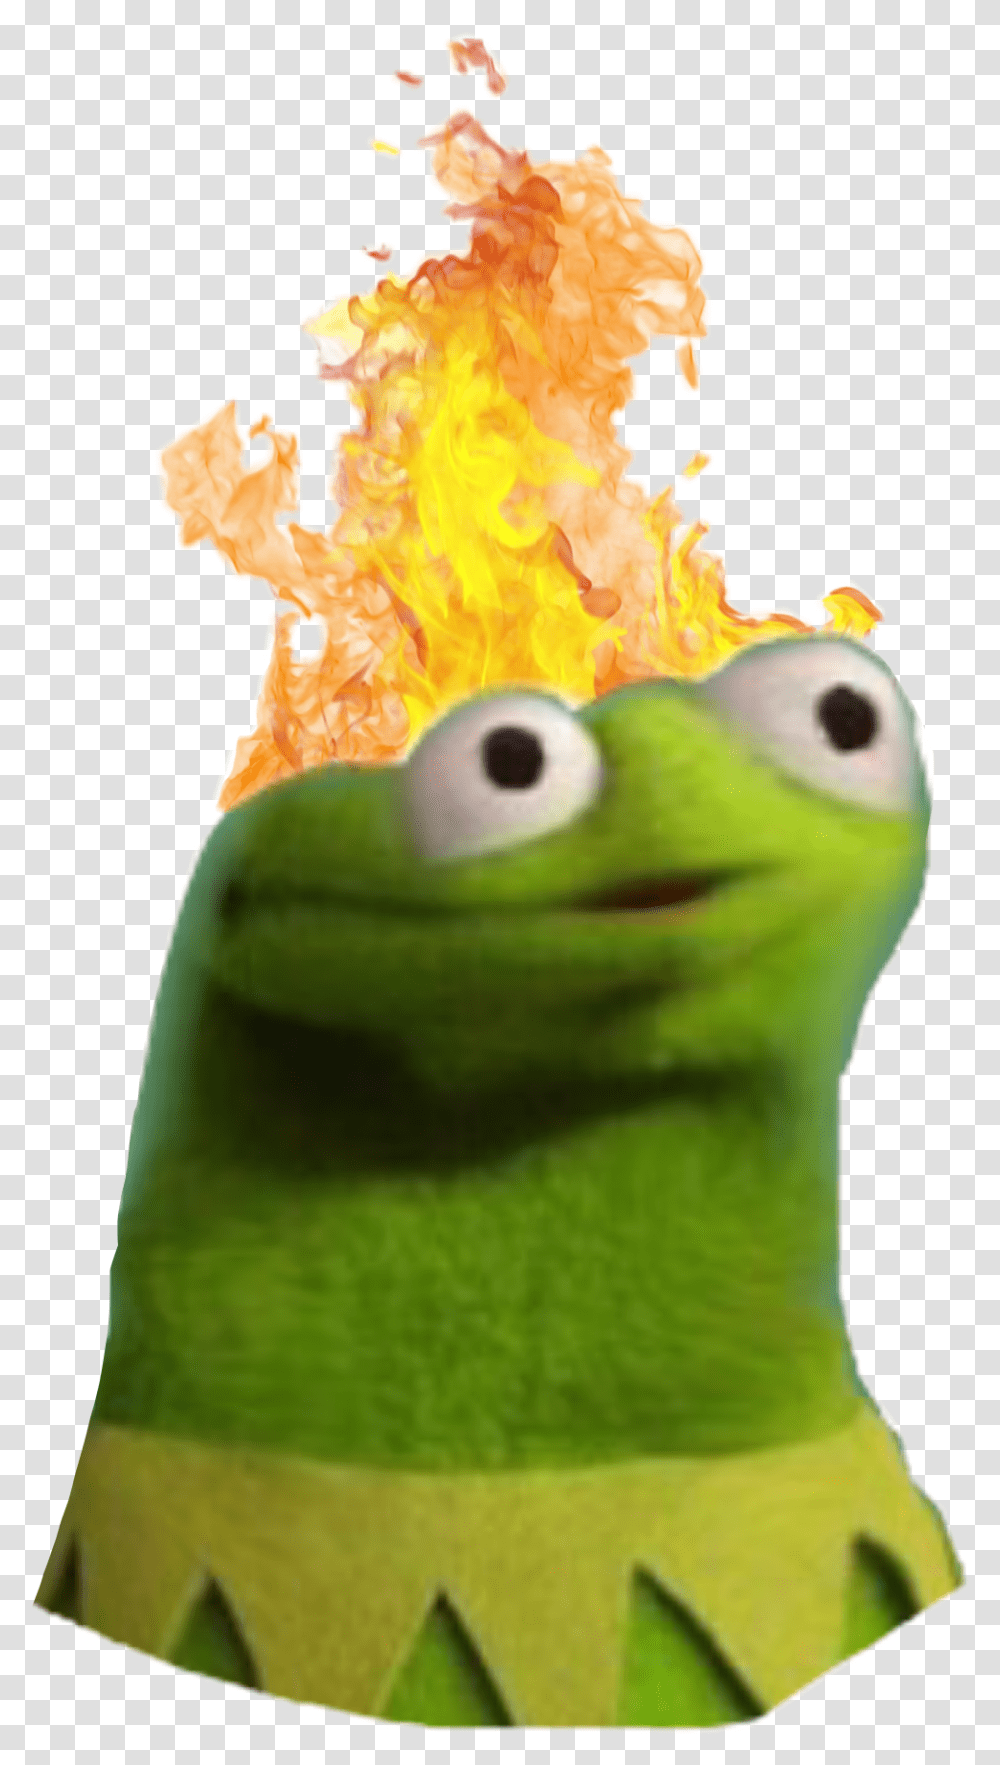 Fire Kermit Derpface Stupidfriends Mylife Lazylooks Derp Kermit The Frog, Animal, Photography, Toy, Plush Transparent Png